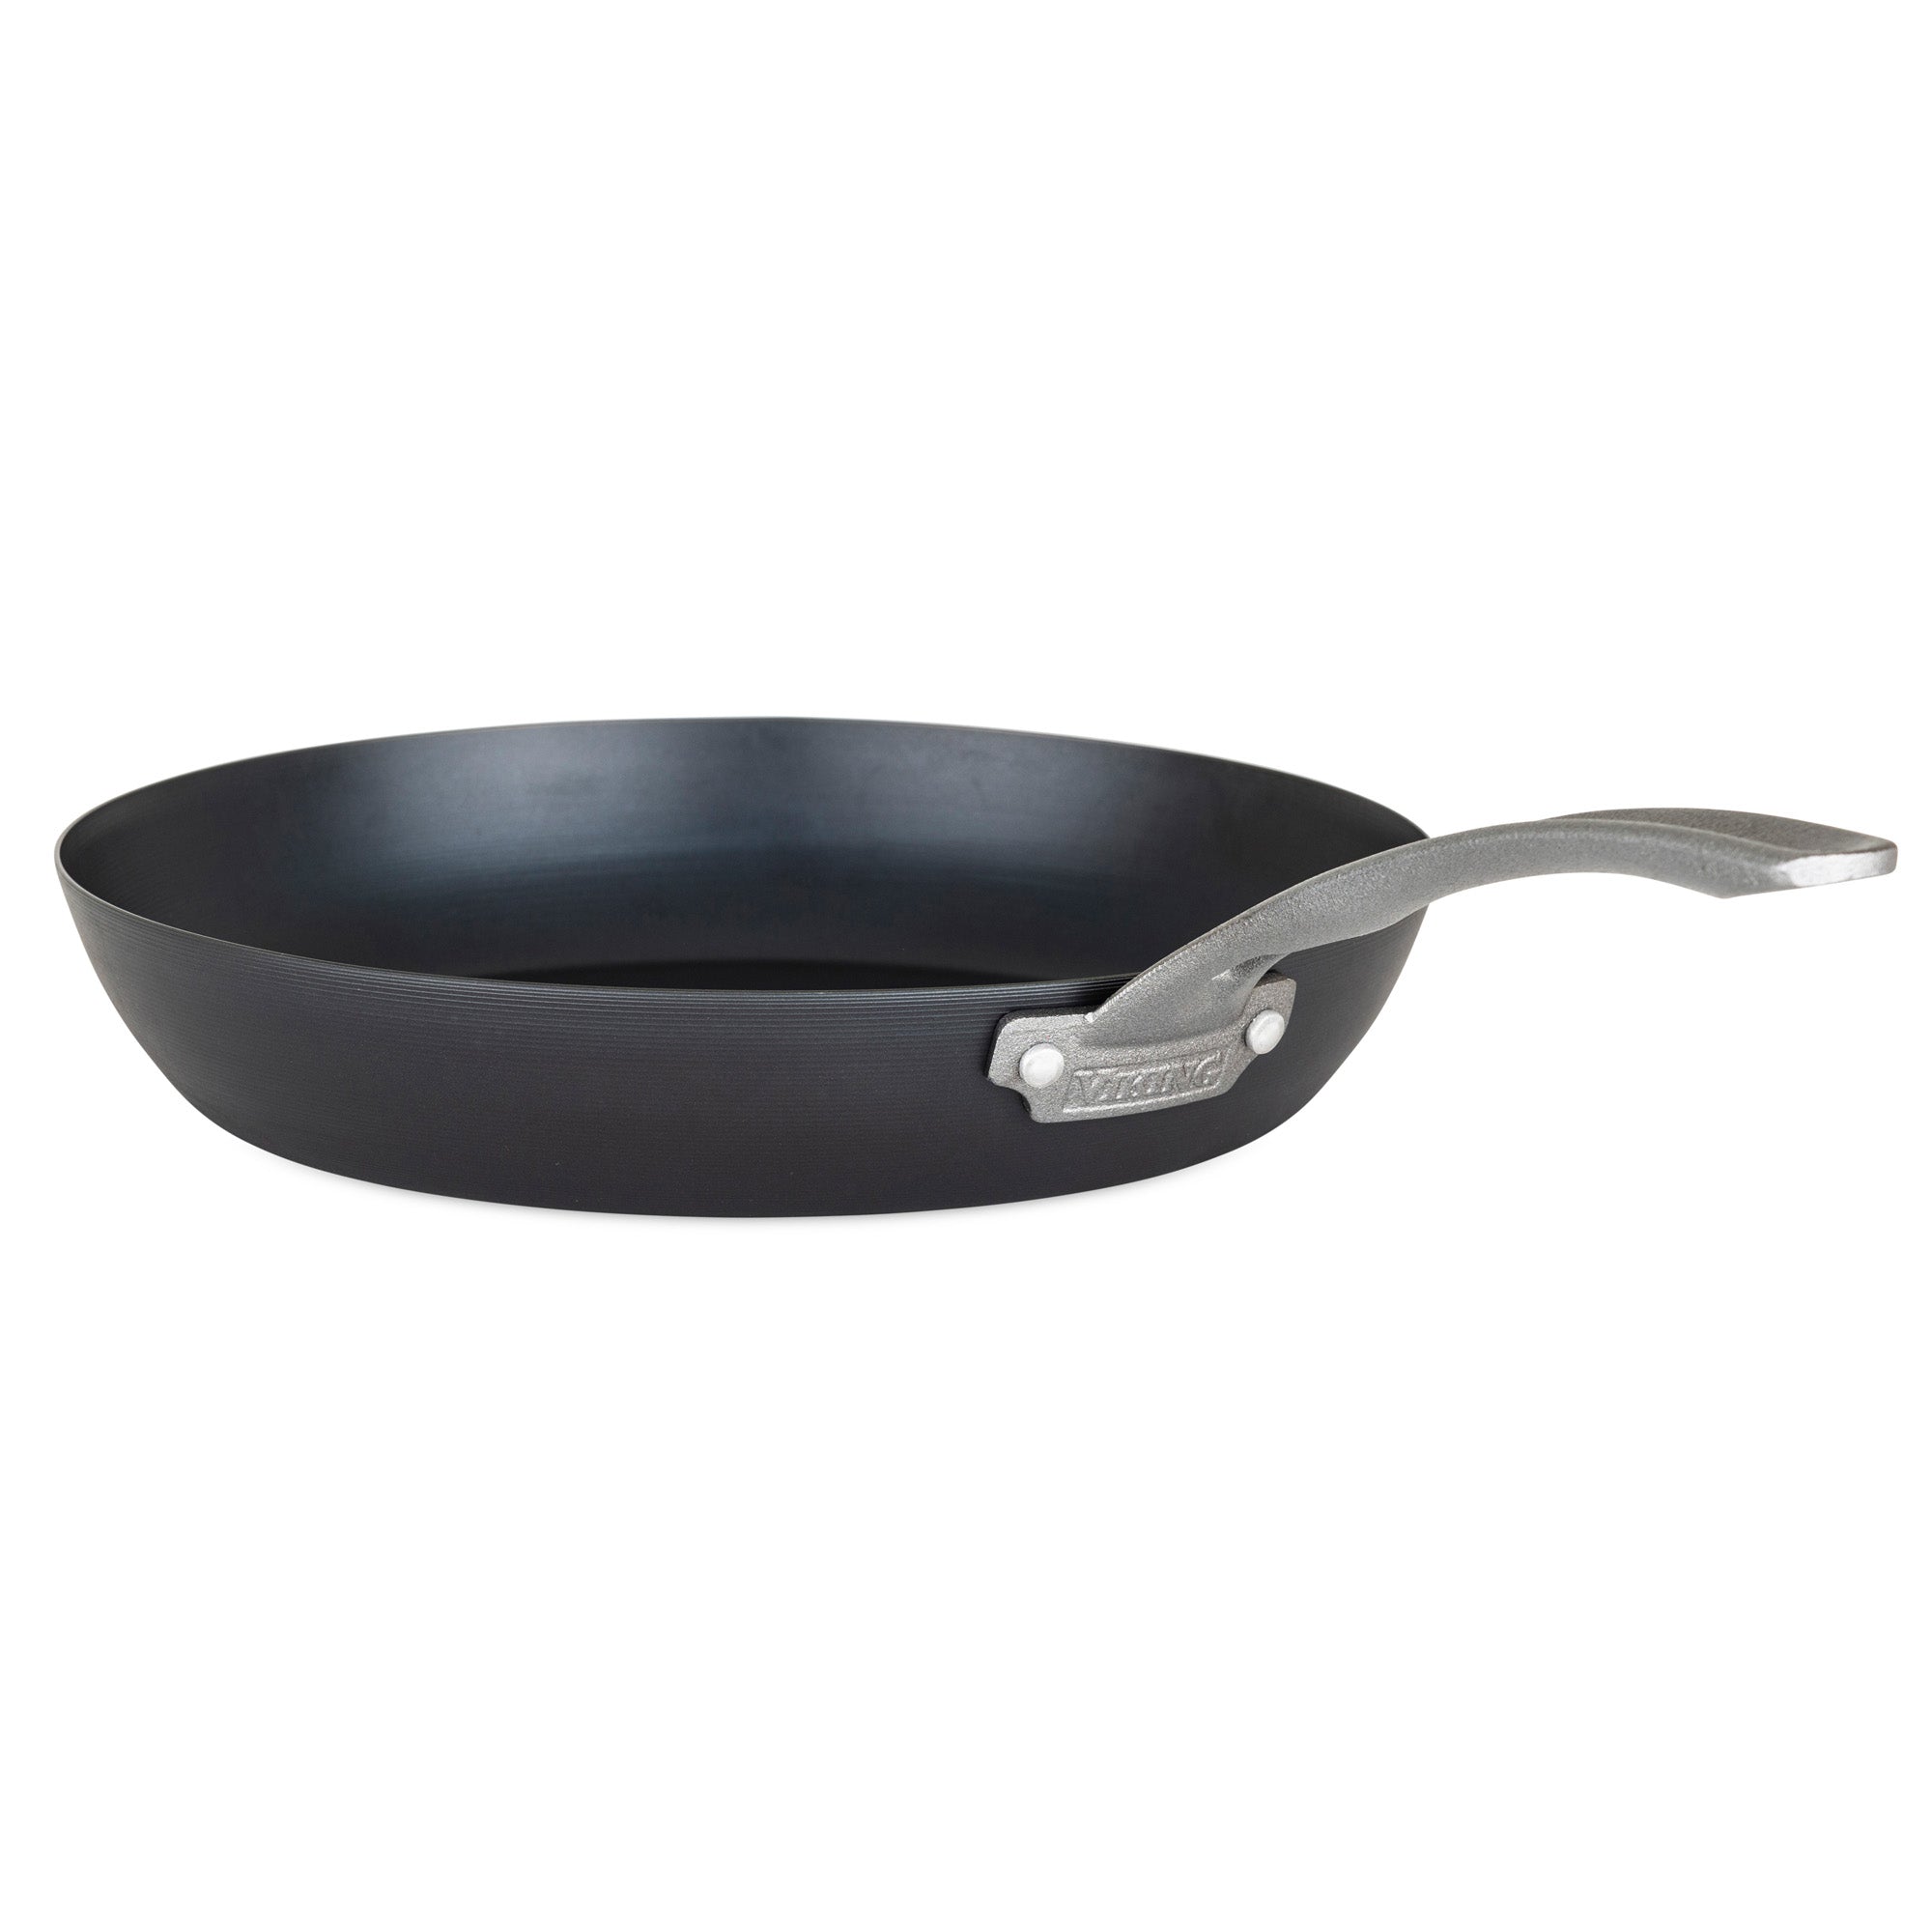 Made In Blue Carbon Steel Frying Pan Review